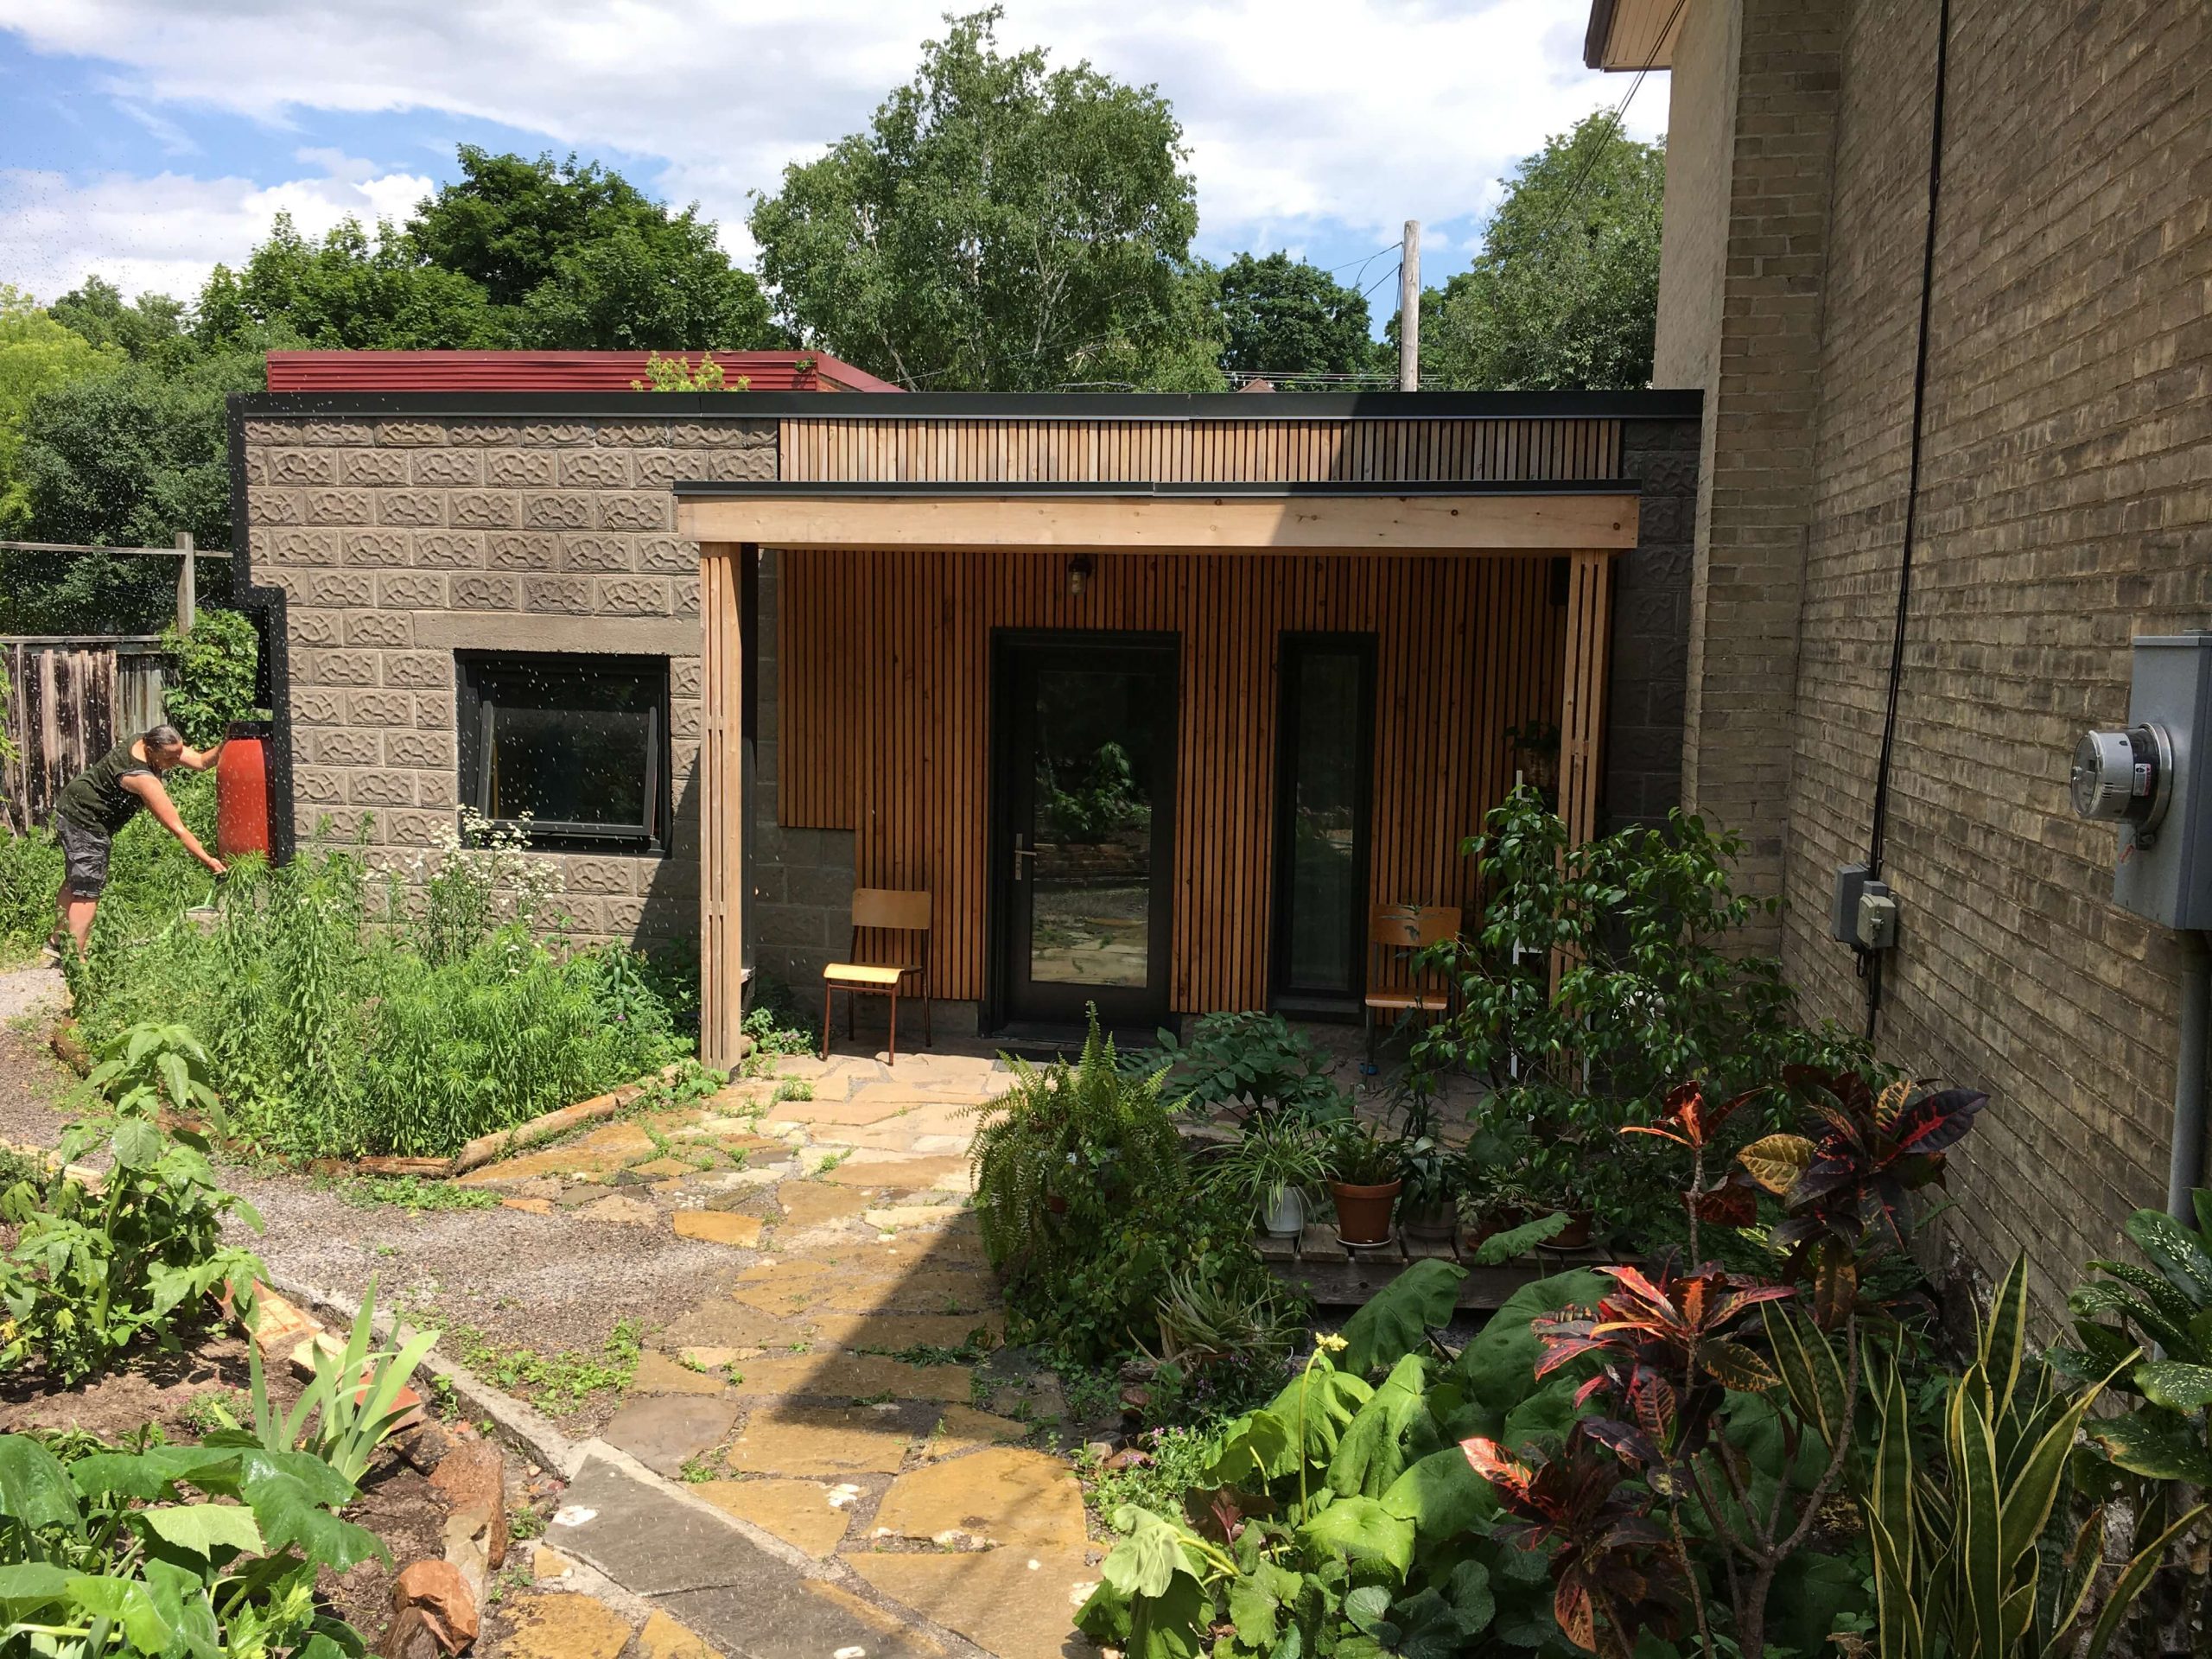 Exterior of an accessory dwelling unit